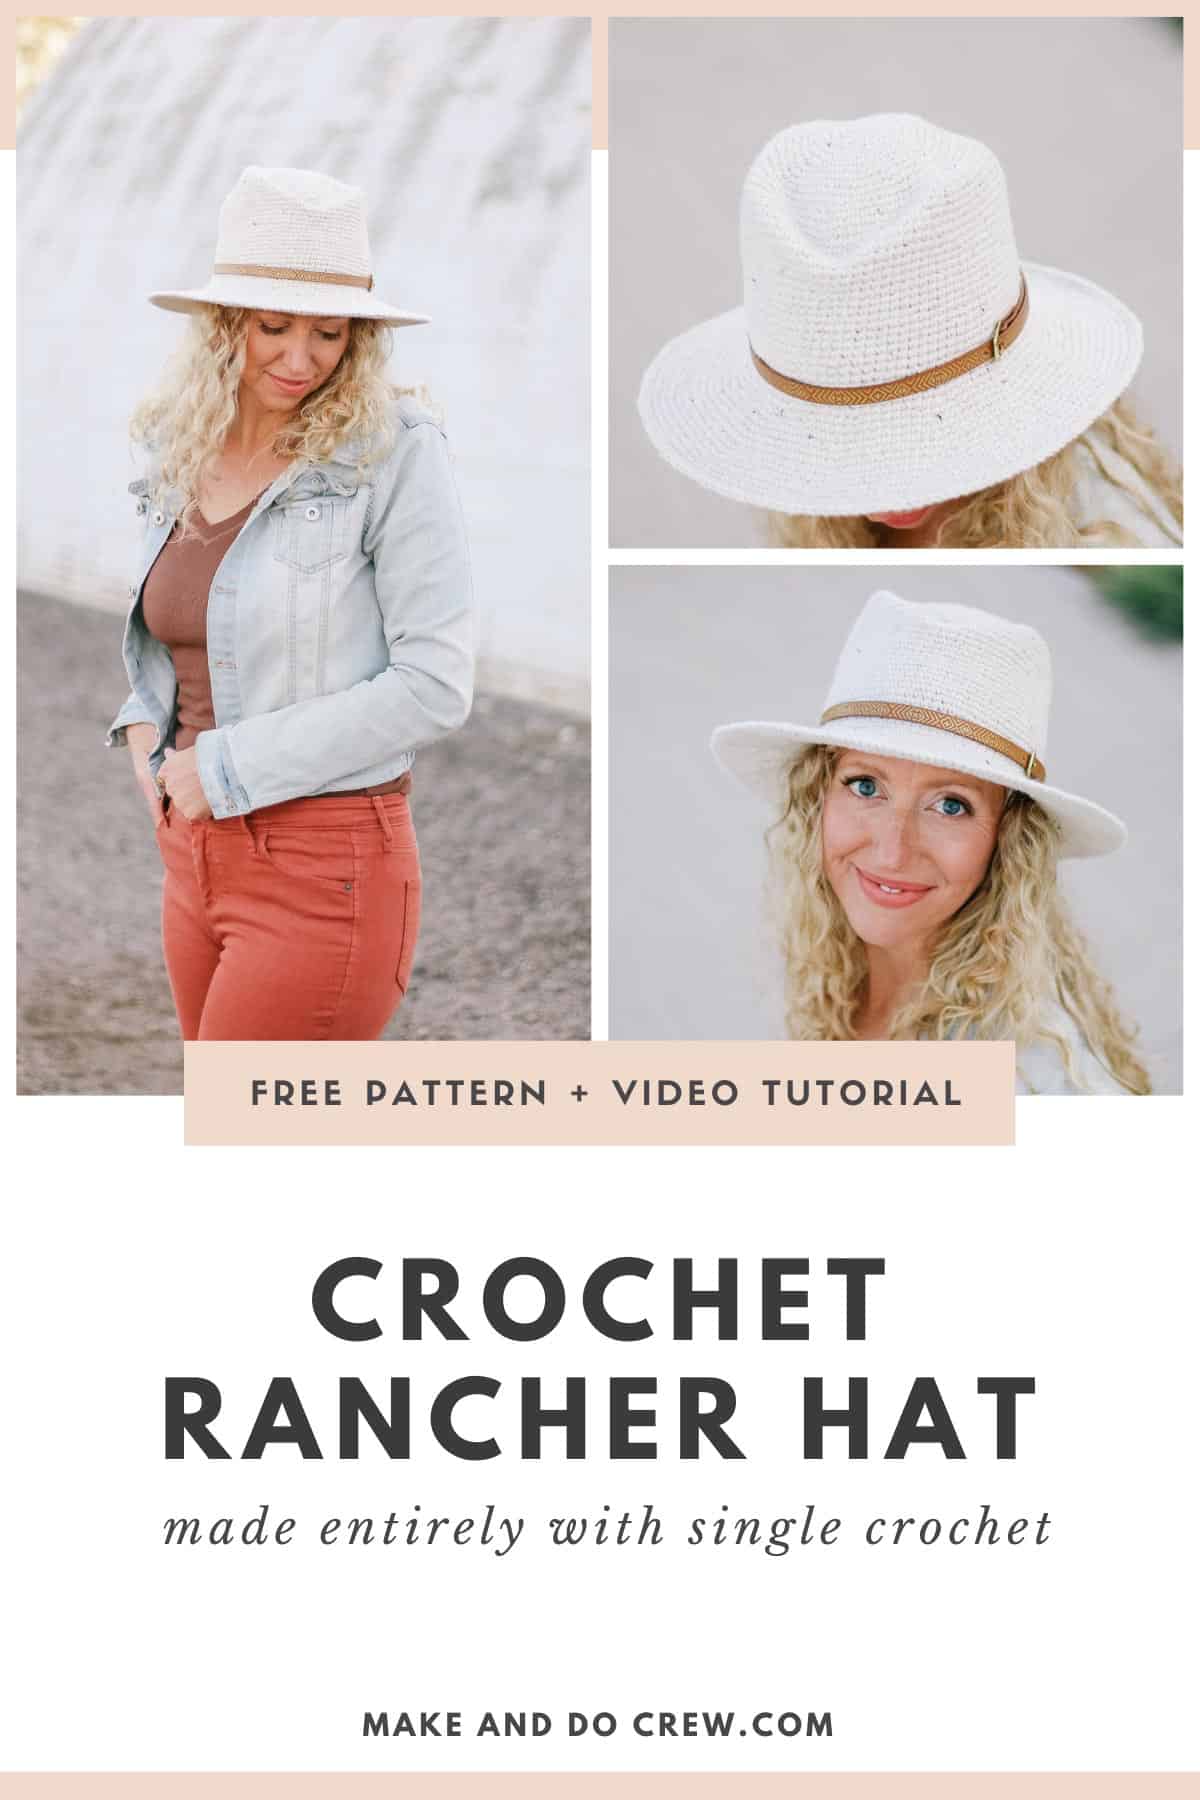 A crochet fedora hat that's made entirely with single crochet stitches and accented with a thrifted leather belt hat band.